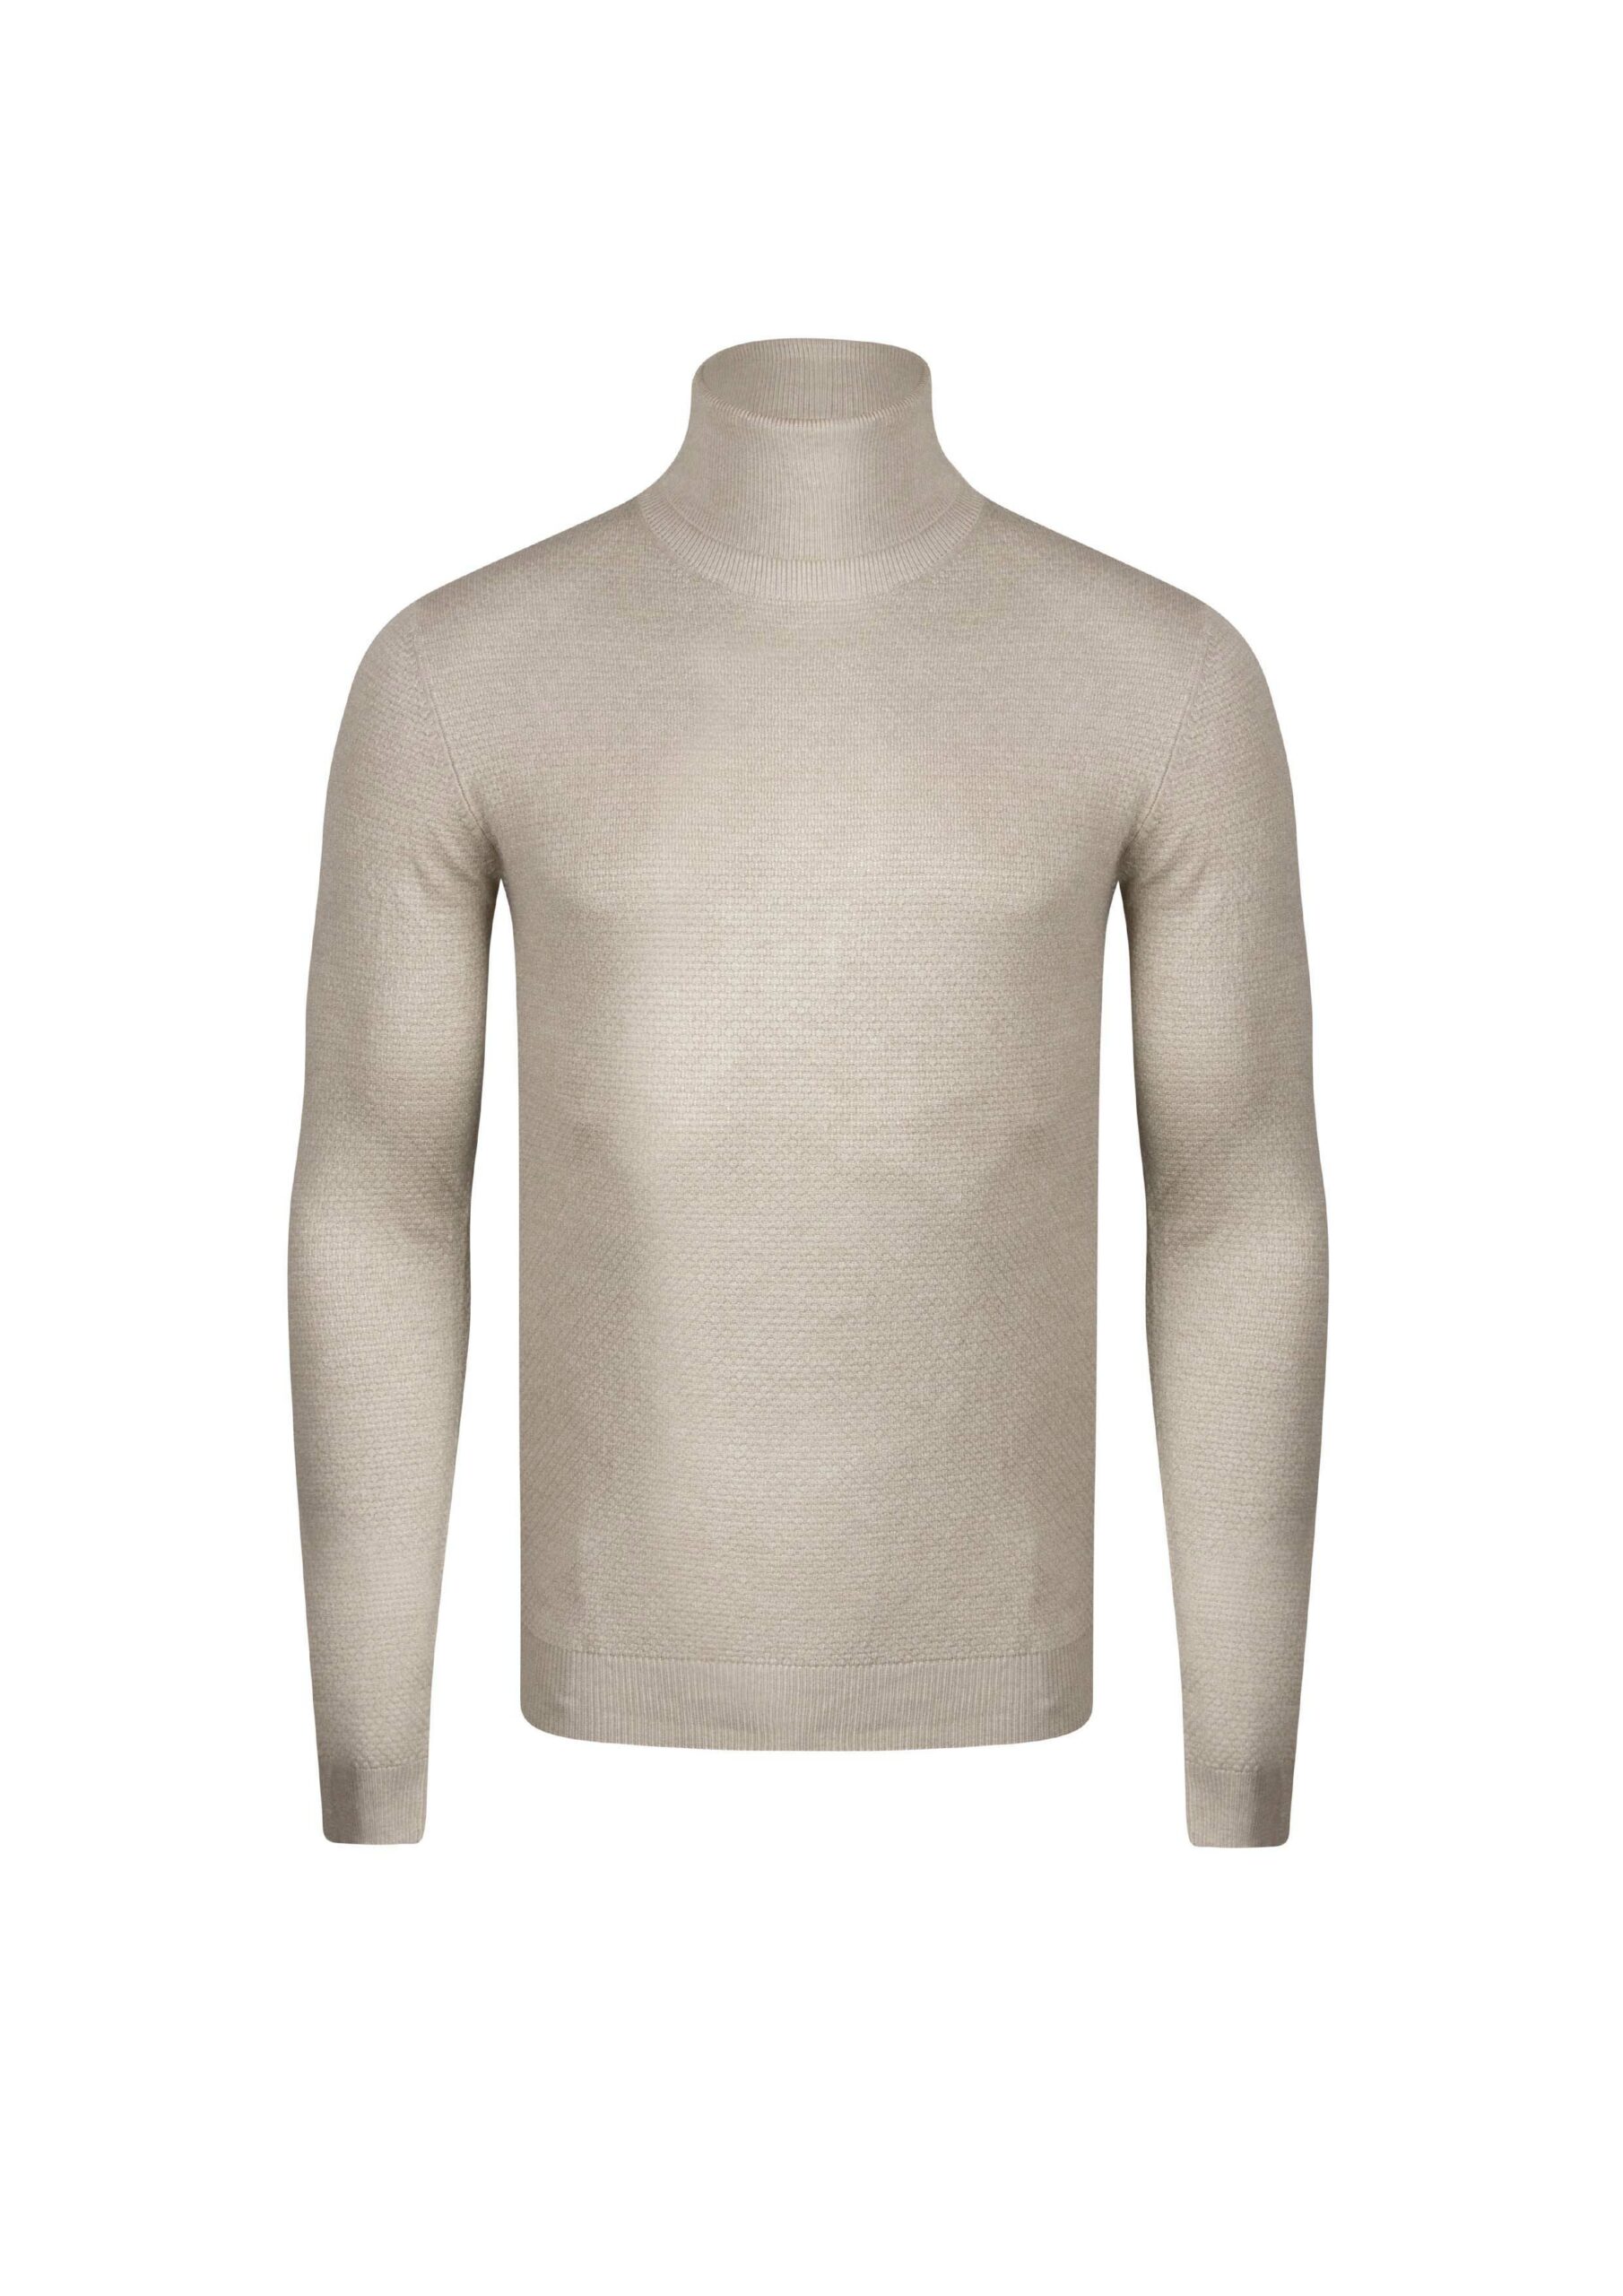 Mens High Neck Sweater - Artisan Outfitters Ltd